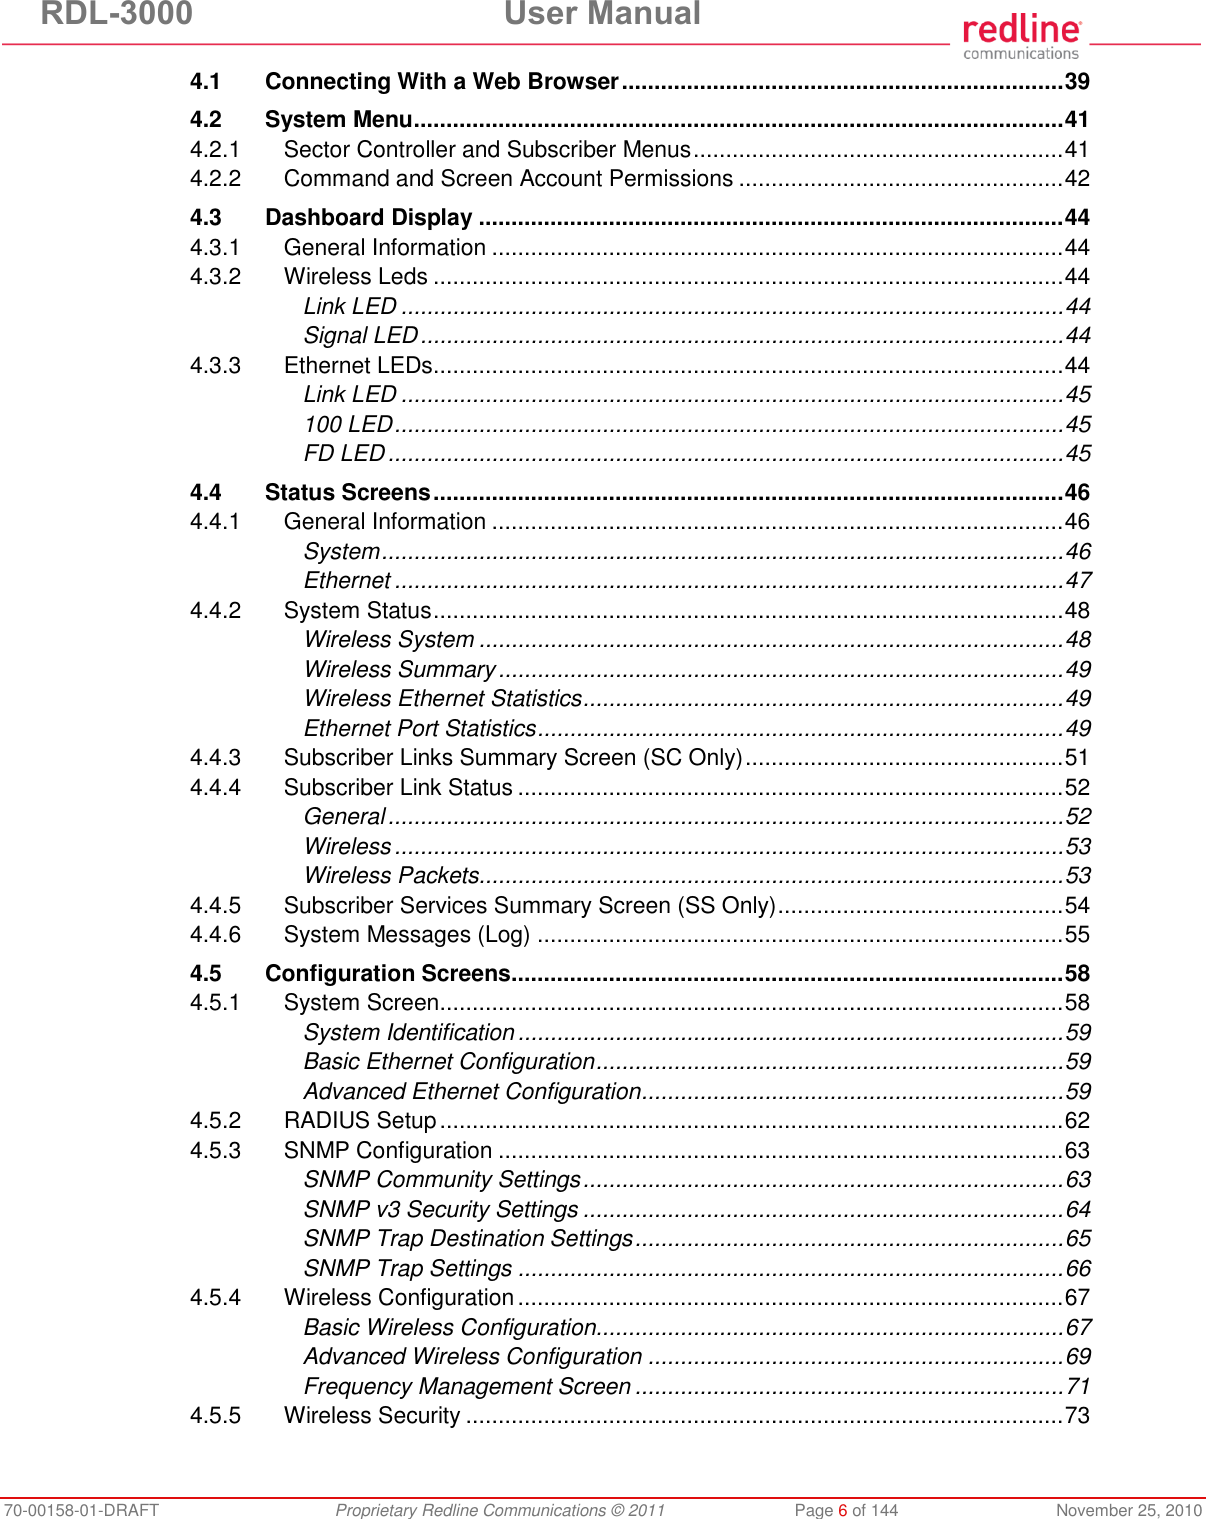 RDL-3000  User Manual 70-00158-01-DRAFT  Proprietary Redline Communications © 2011  Page 6 of 144  November 25, 2010 4.1 Connecting With a Web Browser .................................................................... 39 4.2 System Menu .................................................................................................... 41 4.2.1 Sector Controller and Subscriber Menus ......................................................... 41 4.2.2 Command and Screen Account Permissions .................................................. 42 4.3 Dashboard Display .......................................................................................... 44 4.3.1 General Information ........................................................................................ 44 4.3.2 Wireless Leds ................................................................................................. 44 Link LED ...................................................................................................... 44 Signal LED ................................................................................................... 44 4.3.3 Ethernet LEDs ................................................................................................. 44 Link LED ...................................................................................................... 45 100 LED ....................................................................................................... 45 FD LED ........................................................................................................ 45 4.4 Status Screens ................................................................................................. 46 4.4.1 General Information ........................................................................................ 46 System ......................................................................................................... 46 Ethernet ....................................................................................................... 47 4.4.2 System Status ................................................................................................. 48 Wireless System .......................................................................................... 48 Wireless Summary ....................................................................................... 49 Wireless Ethernet Statistics .......................................................................... 49 Ethernet Port Statistics ................................................................................. 49 4.4.3 Subscriber Links Summary Screen (SC Only) ................................................. 51 4.4.4 Subscriber Link Status .................................................................................... 52 General ........................................................................................................ 52 Wireless ....................................................................................................... 53 Wireless Packets .......................................................................................... 53 4.4.5 Subscriber Services Summary Screen (SS Only) ............................................ 54 4.4.6 System Messages (Log) ................................................................................. 55 4.5 Configuration Screens ..................................................................................... 58 4.5.1 System Screen ................................................................................................ 58 System Identification .................................................................................... 59 Basic Ethernet Configuration ........................................................................ 59 Advanced Ethernet Configuration ................................................................. 59 4.5.2 RADIUS Setup ................................................................................................ 62 4.5.3 SNMP Configuration ....................................................................................... 63 SNMP Community Settings .......................................................................... 63 SNMP v3 Security Settings .......................................................................... 64 SNMP Trap Destination Settings .................................................................. 65 SNMP Trap Settings .................................................................................... 66 4.5.4 Wireless Configuration .................................................................................... 67 Basic Wireless Configuration........................................................................ 67 Advanced Wireless Configuration ................................................................ 69 Frequency Management Screen .................................................................. 71 4.5.5 Wireless Security ............................................................................................ 73 